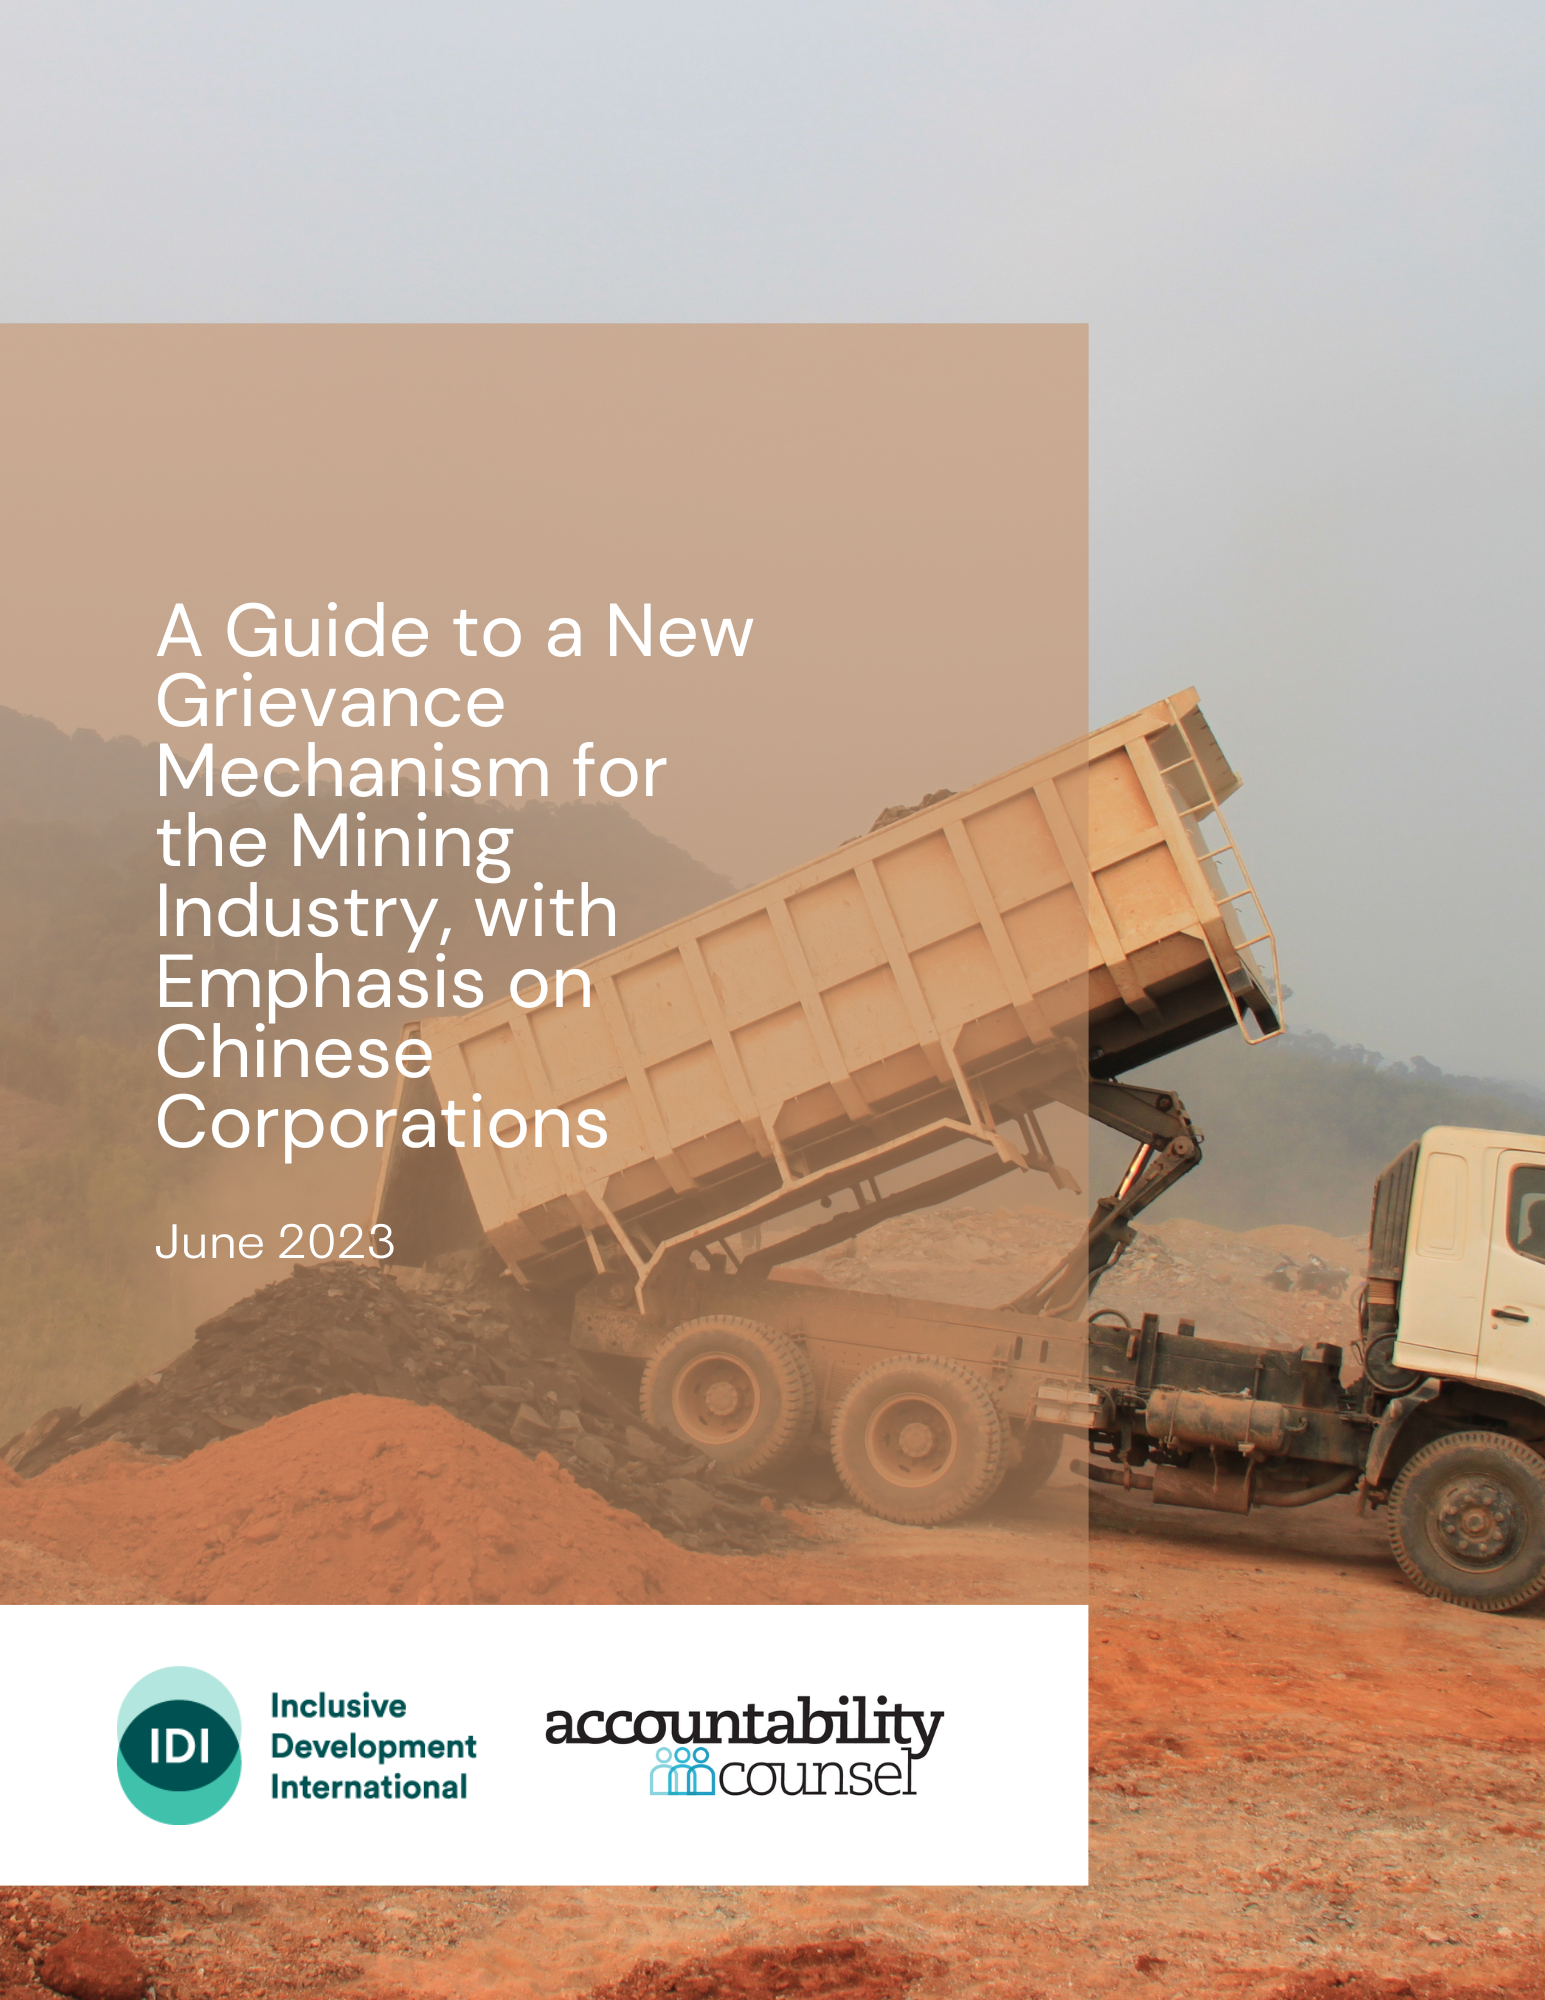 A Guide to a New Grievance Mechanism for the Mining Industry, with Emphasis on Chinese Corporations